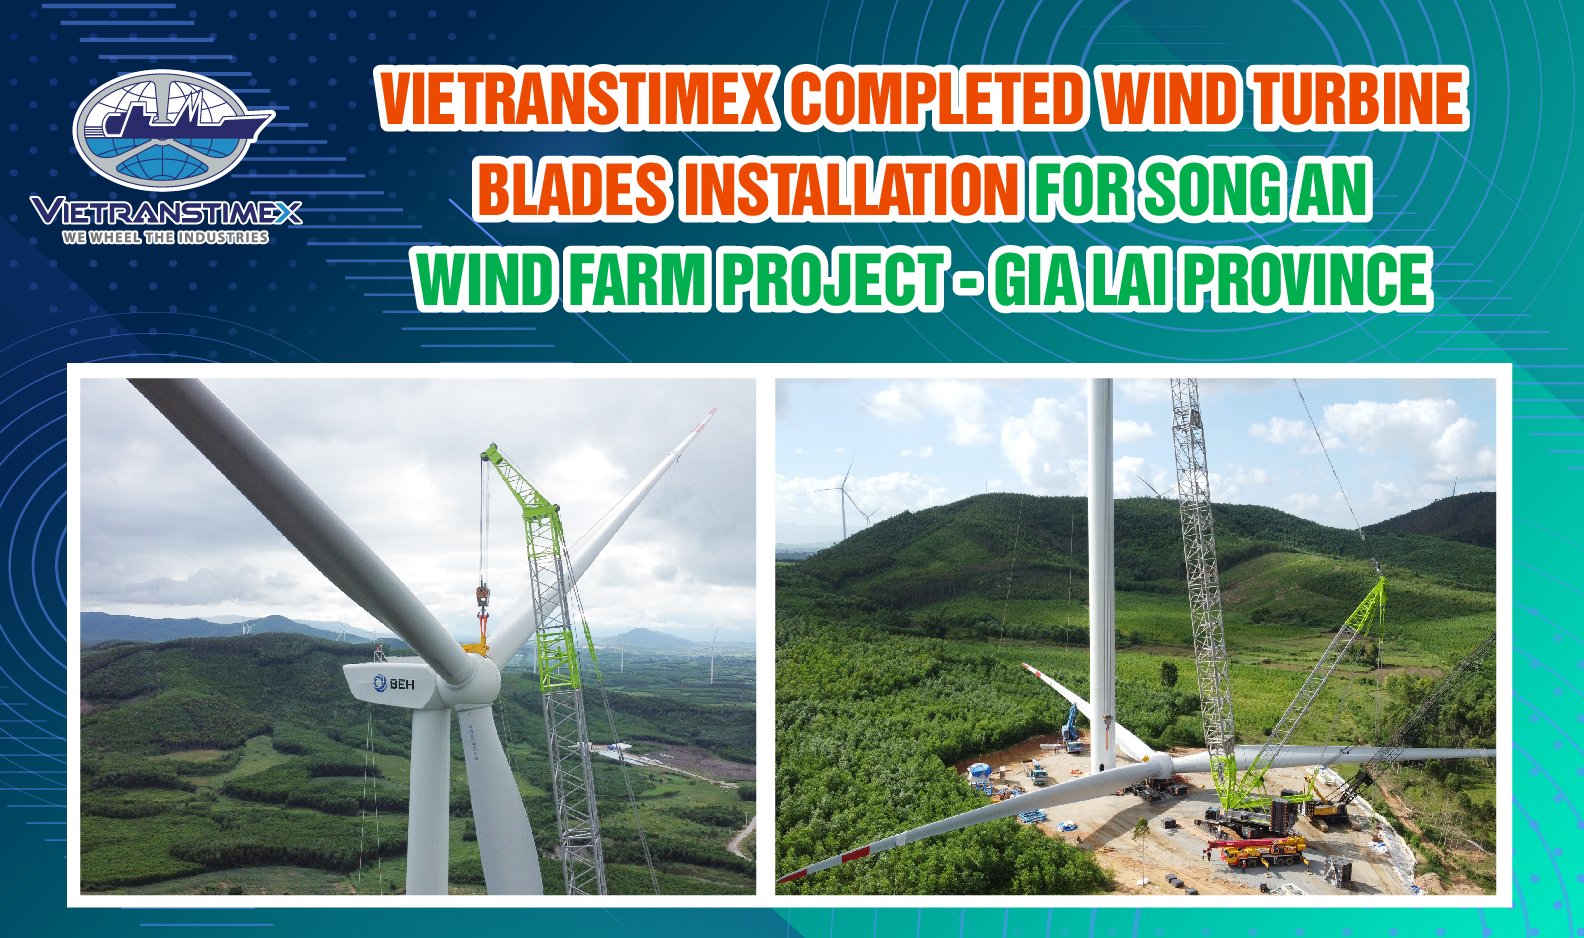 Vietranstimex Completed Wind Turbine Blades Installation For Song An Wind Farm Project – Gia Lai Province